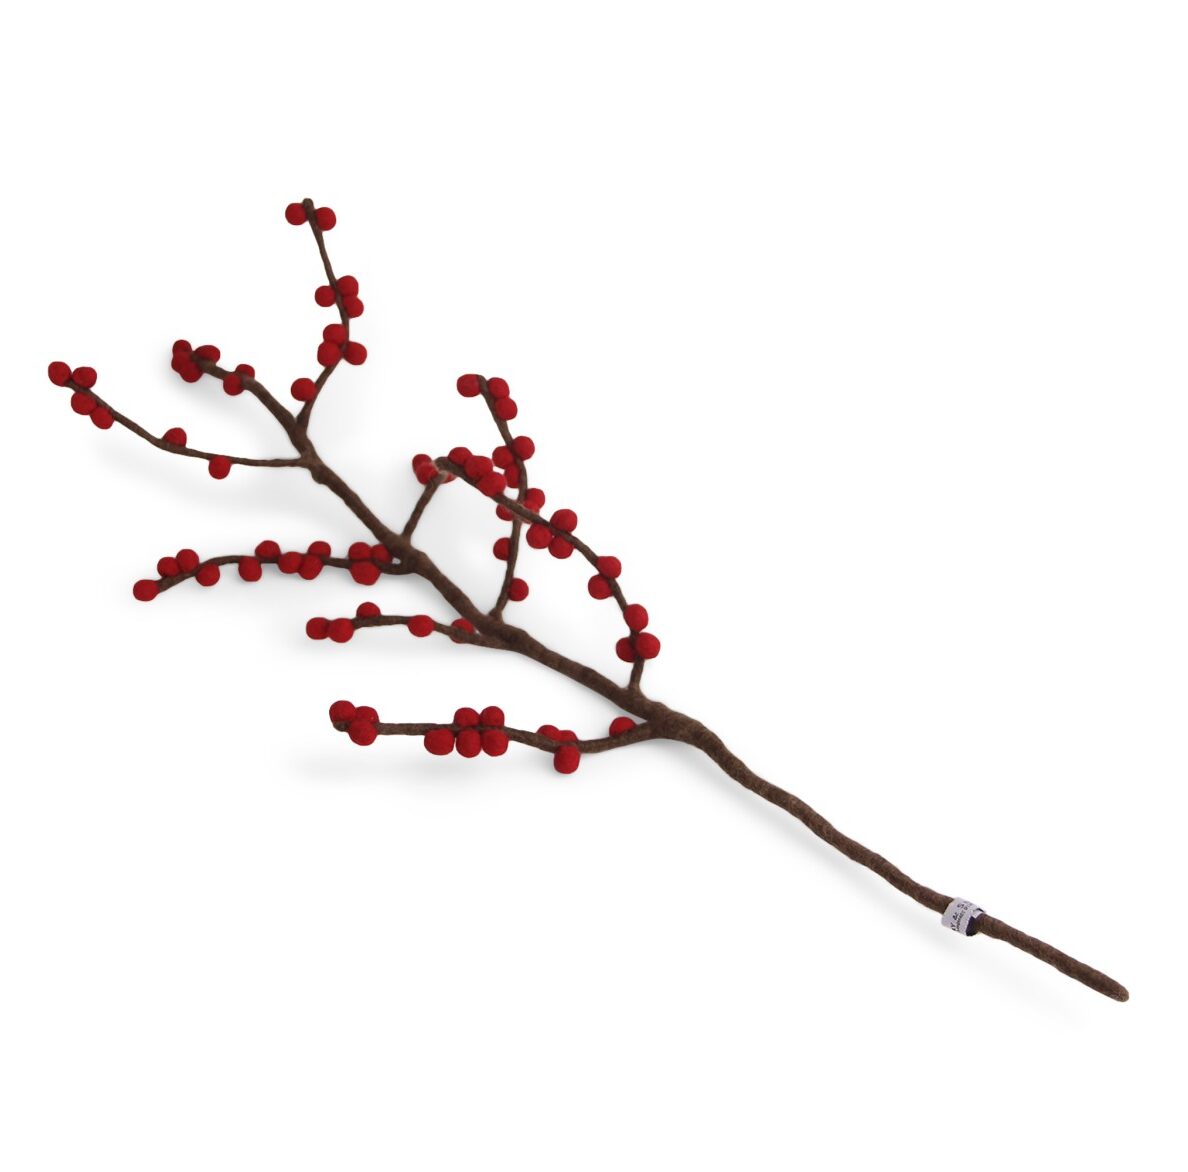 Branche avec baies rouges - grande - Gry & Sif